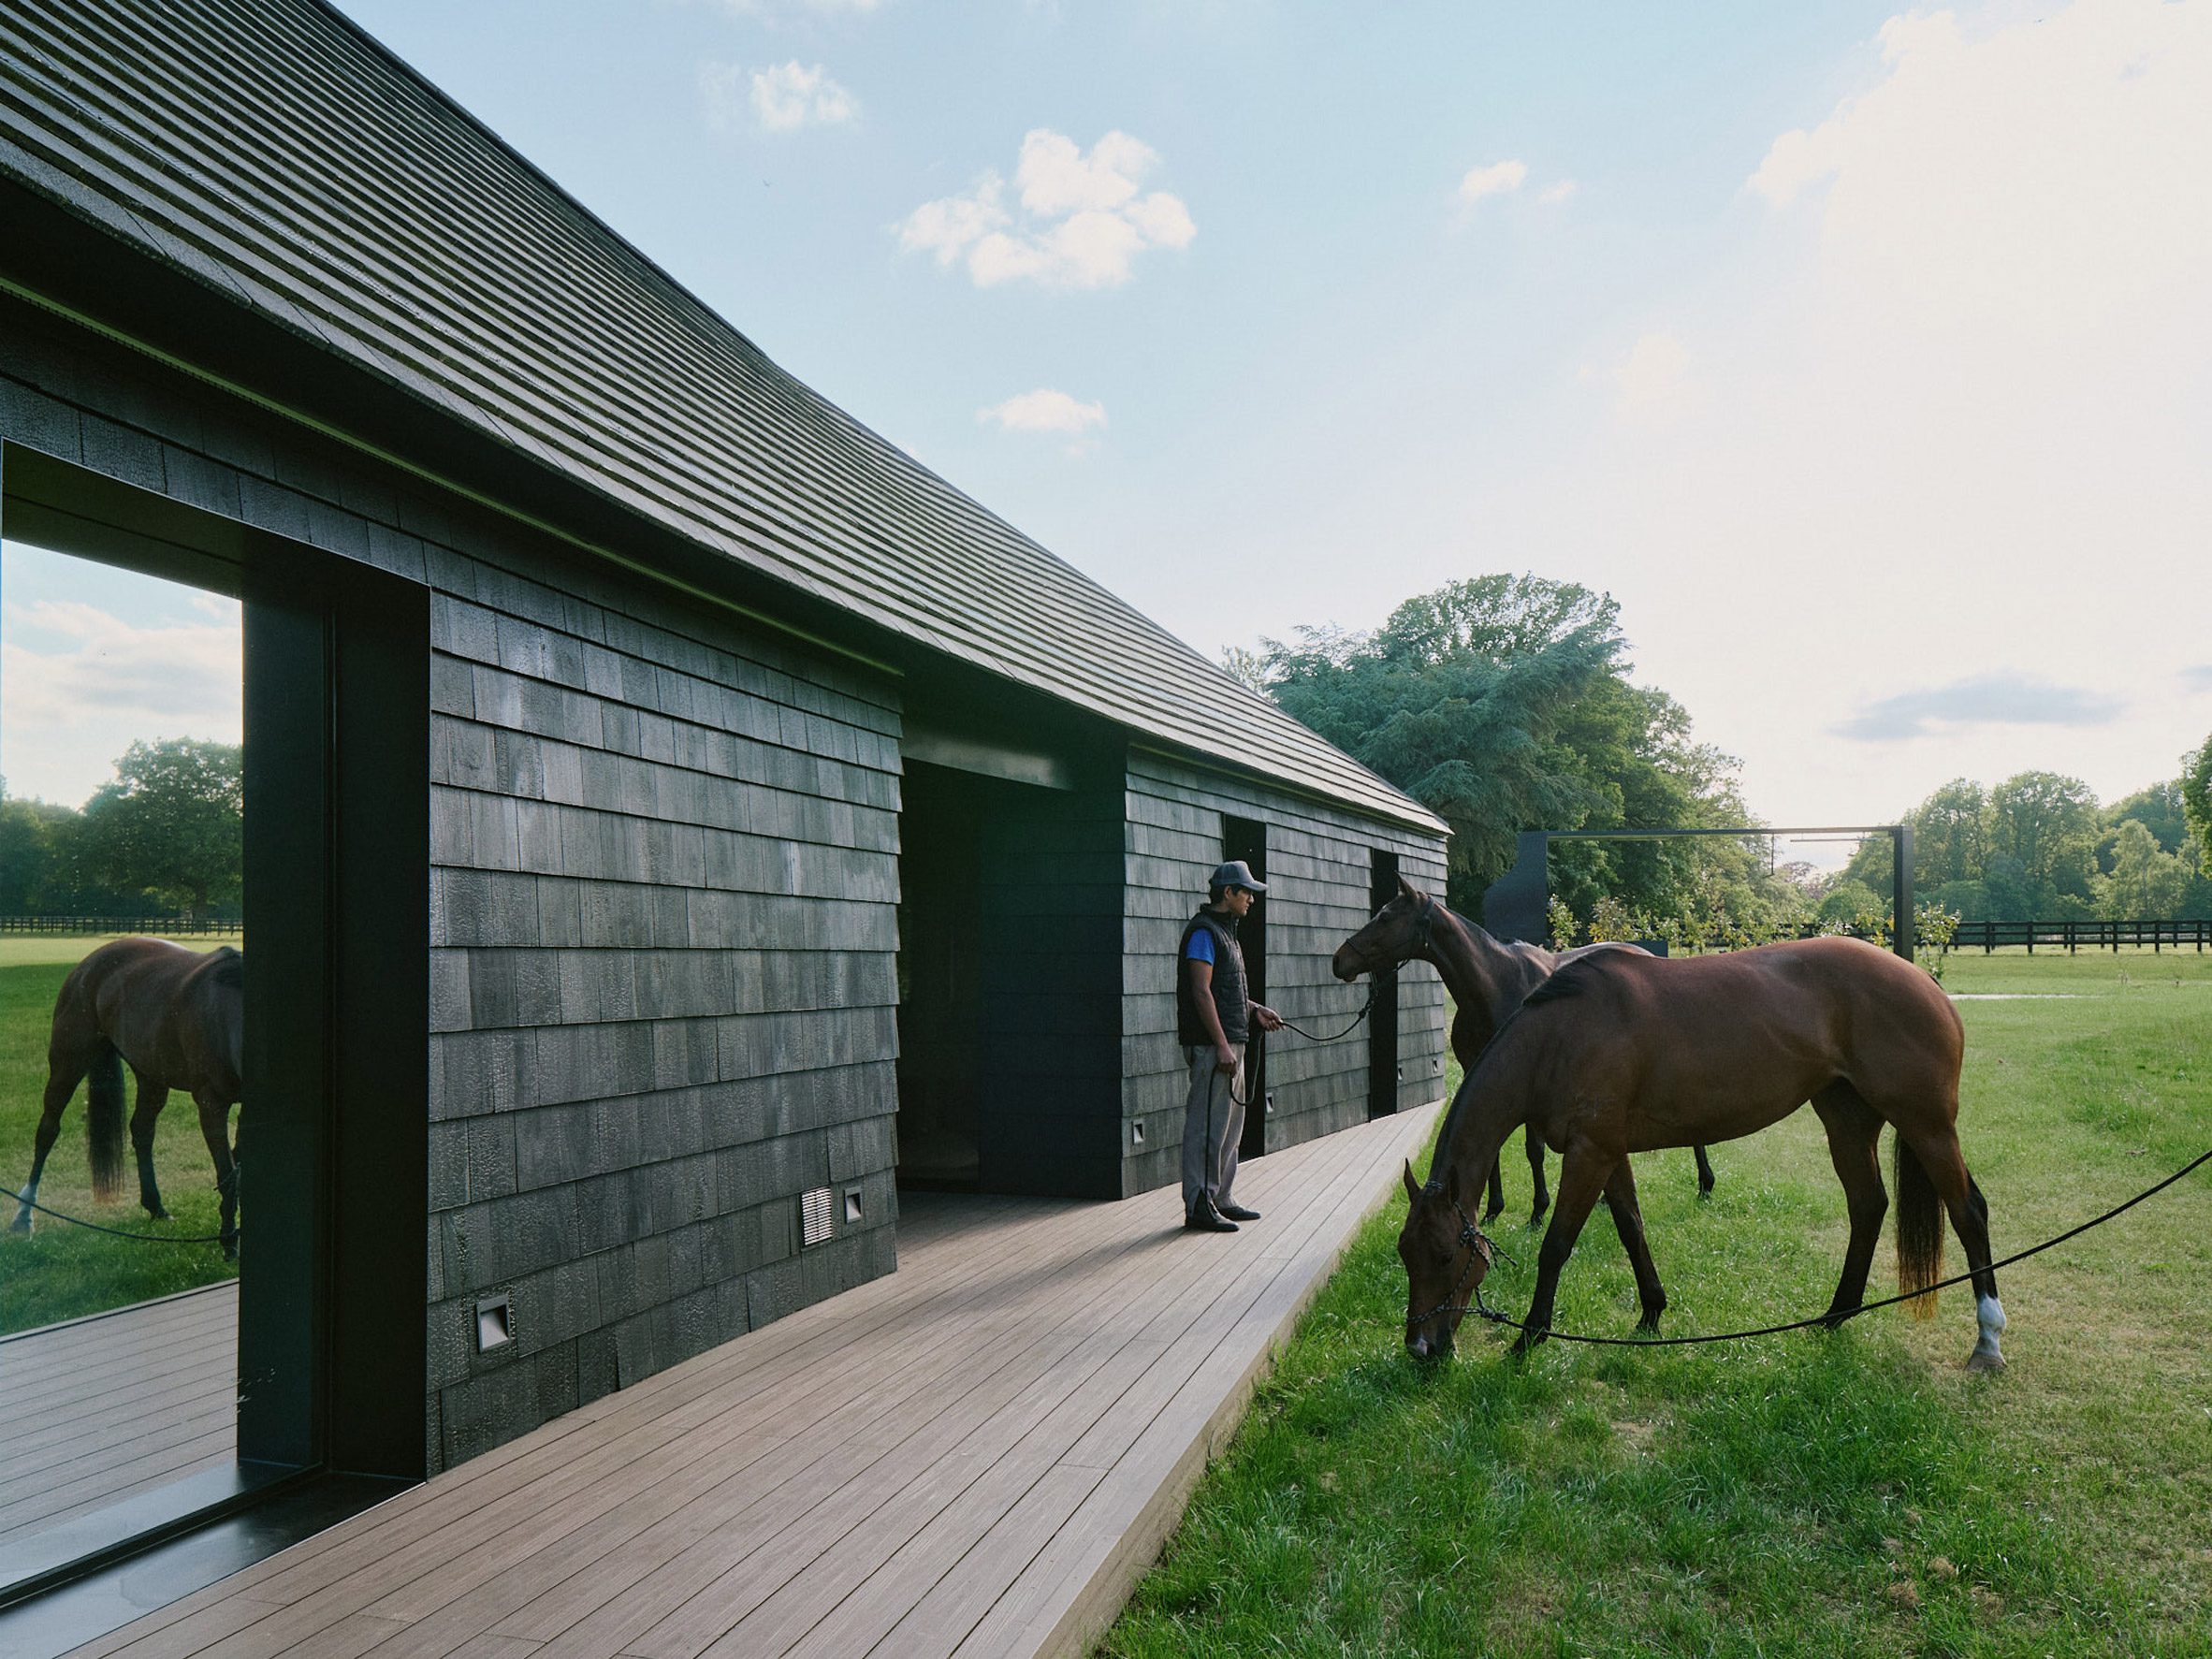 Charred-timber clubhouse in a polo field